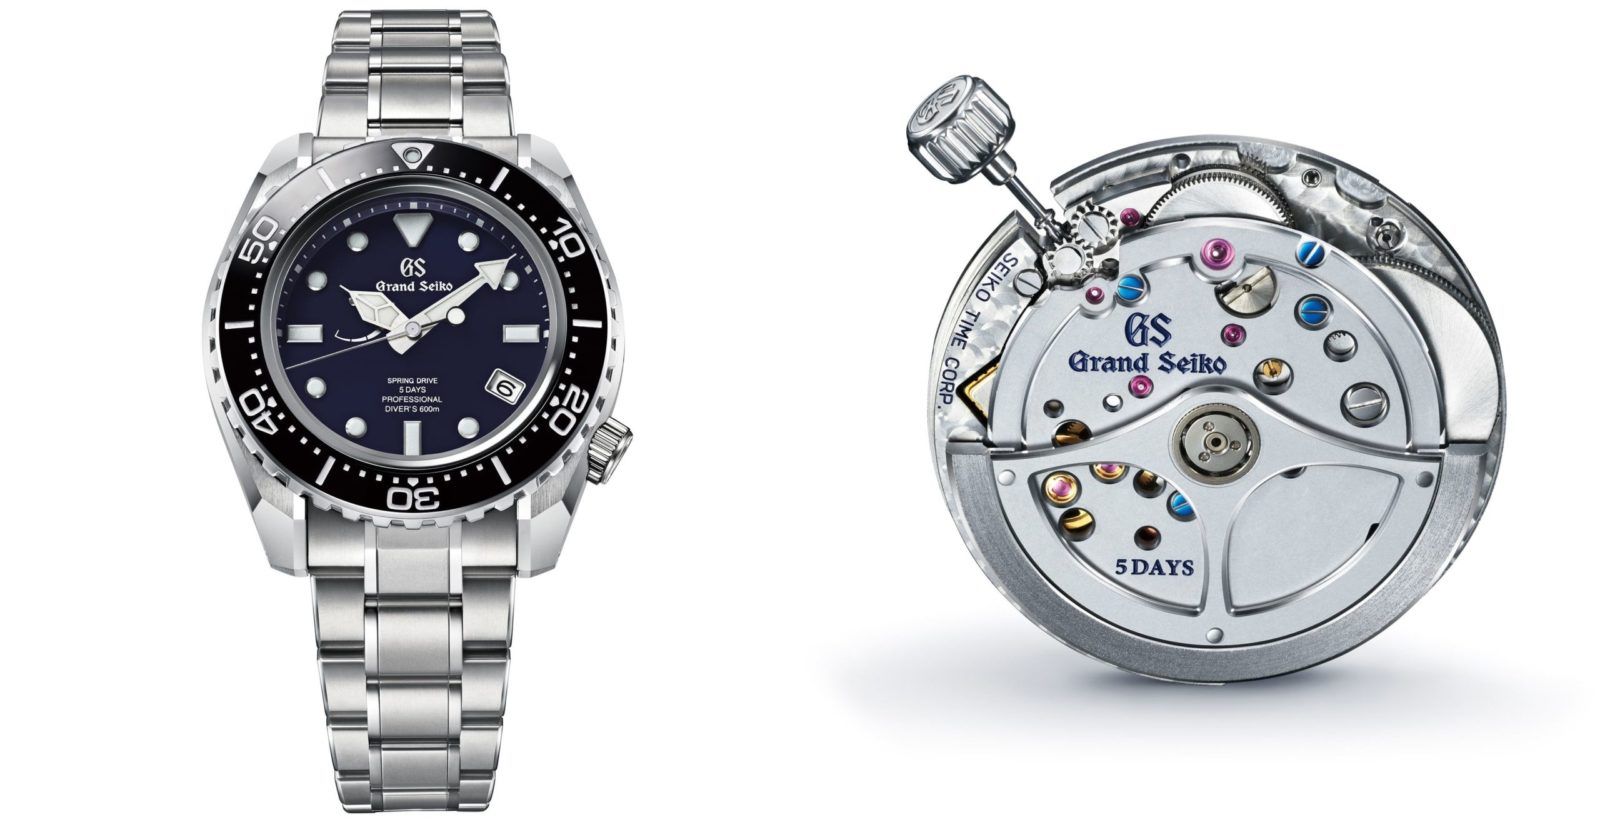 Grand Seiko introduces a new Spring Drive in the SLGA001 dive watch